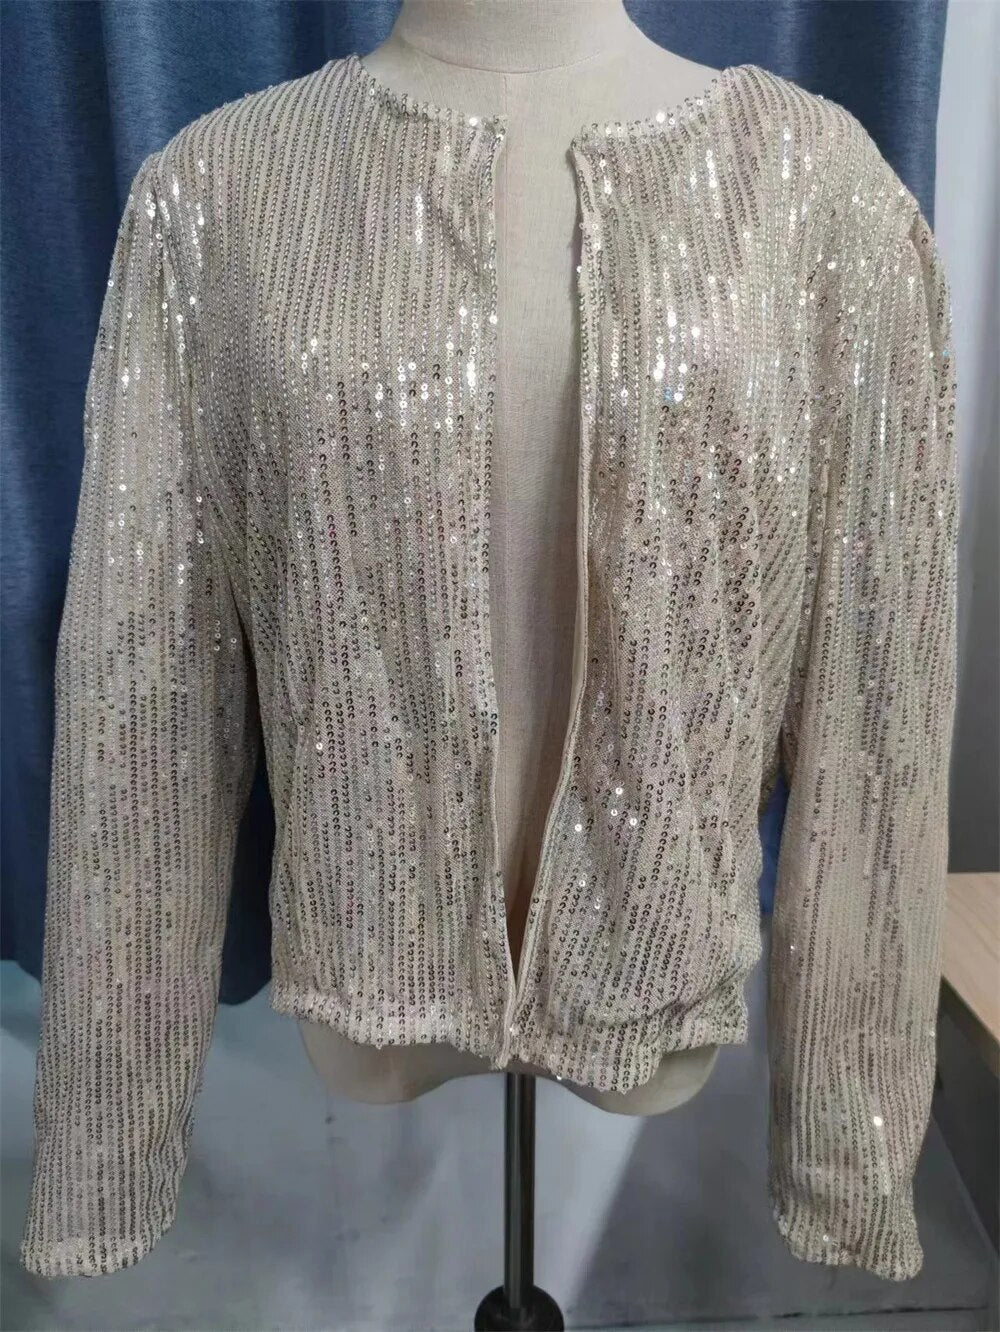 Sequin Casual Bomber Jackets Women - Polished 24/7